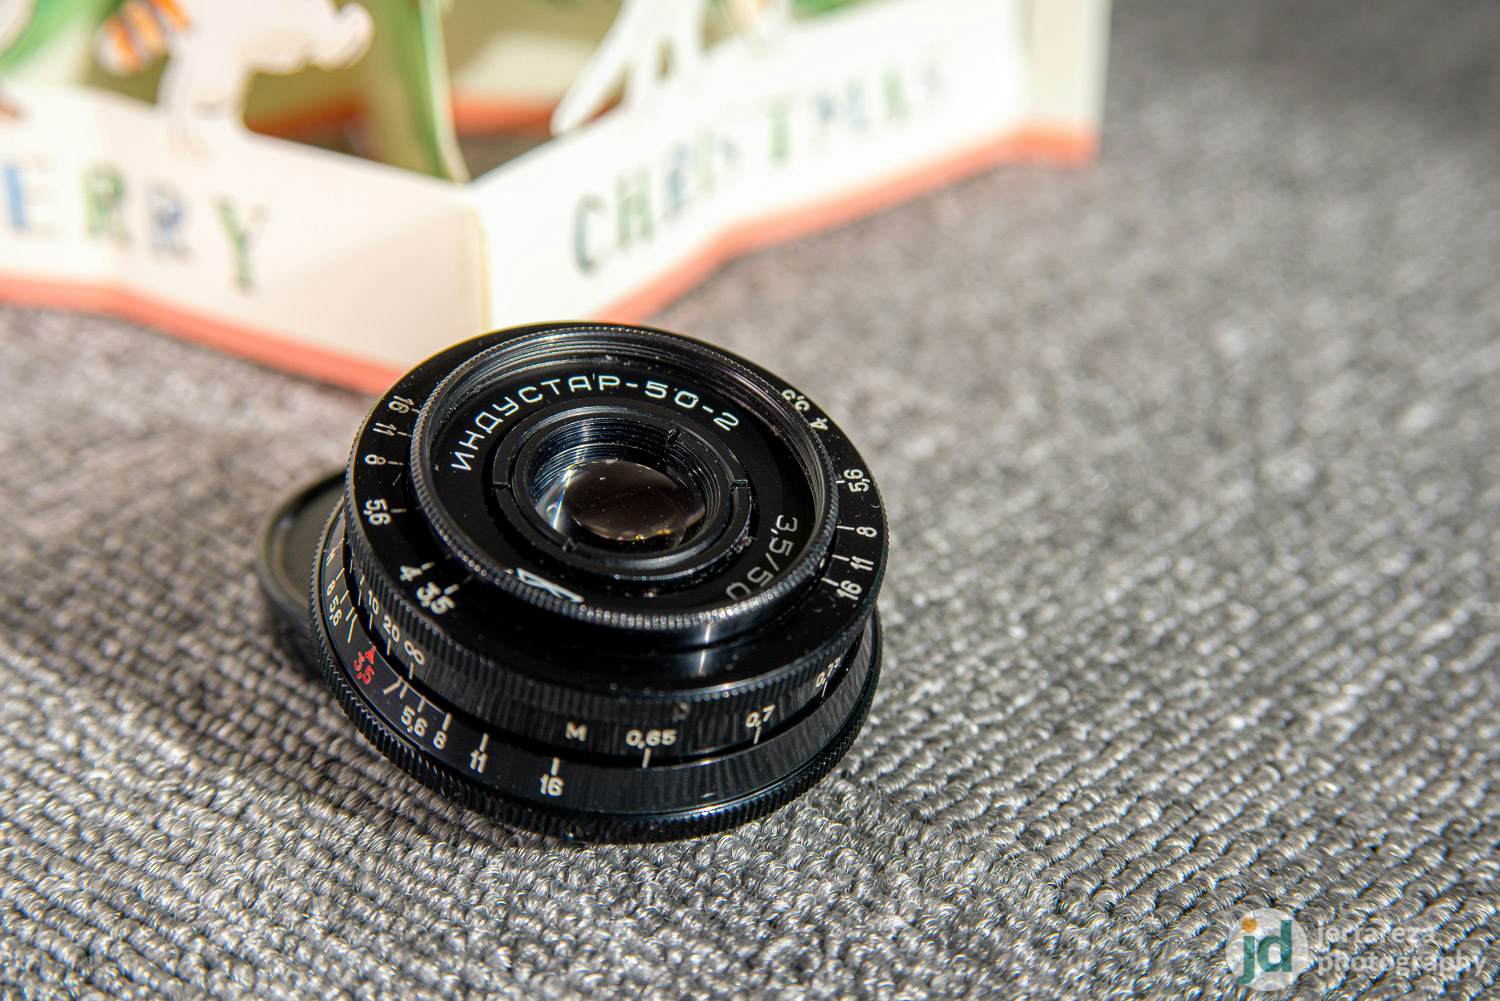 [Lens Review] Industar 50mm f3.5